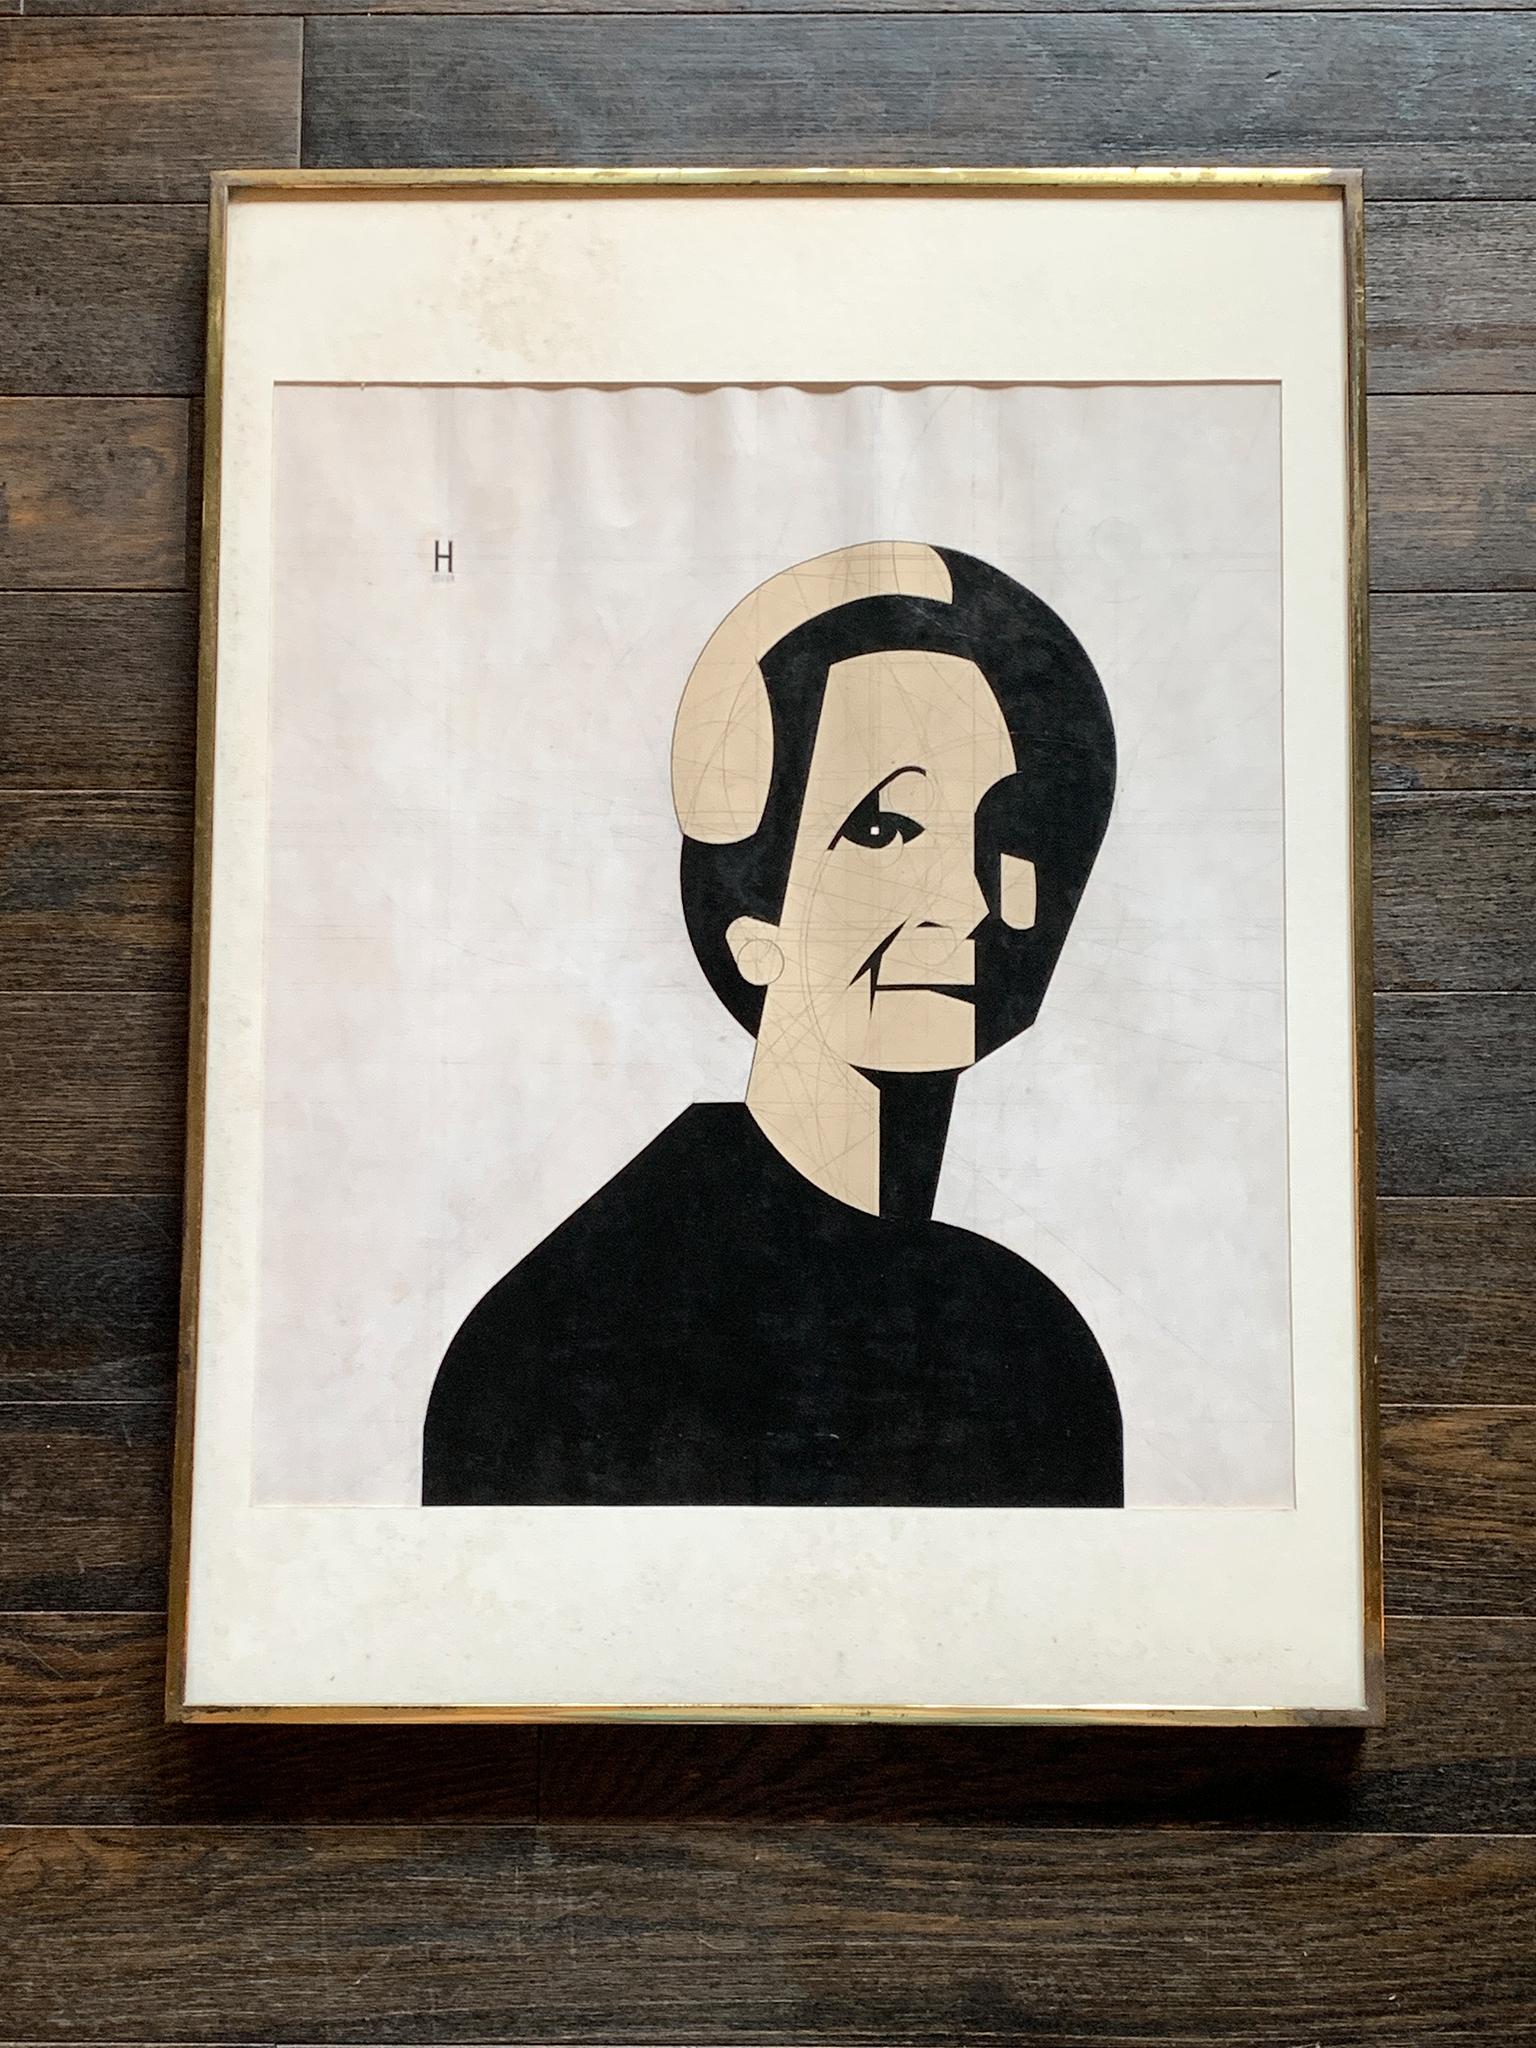 This 1964 drawing by Earl Hubbard (1923-2003) portrays his mother in a simplified form and black-and-white palette. The work is mixed-media on paper. It comes in a metal frame with glass cover.

Frame dimensions:
18 1/4 in. width
24 1/4 in.